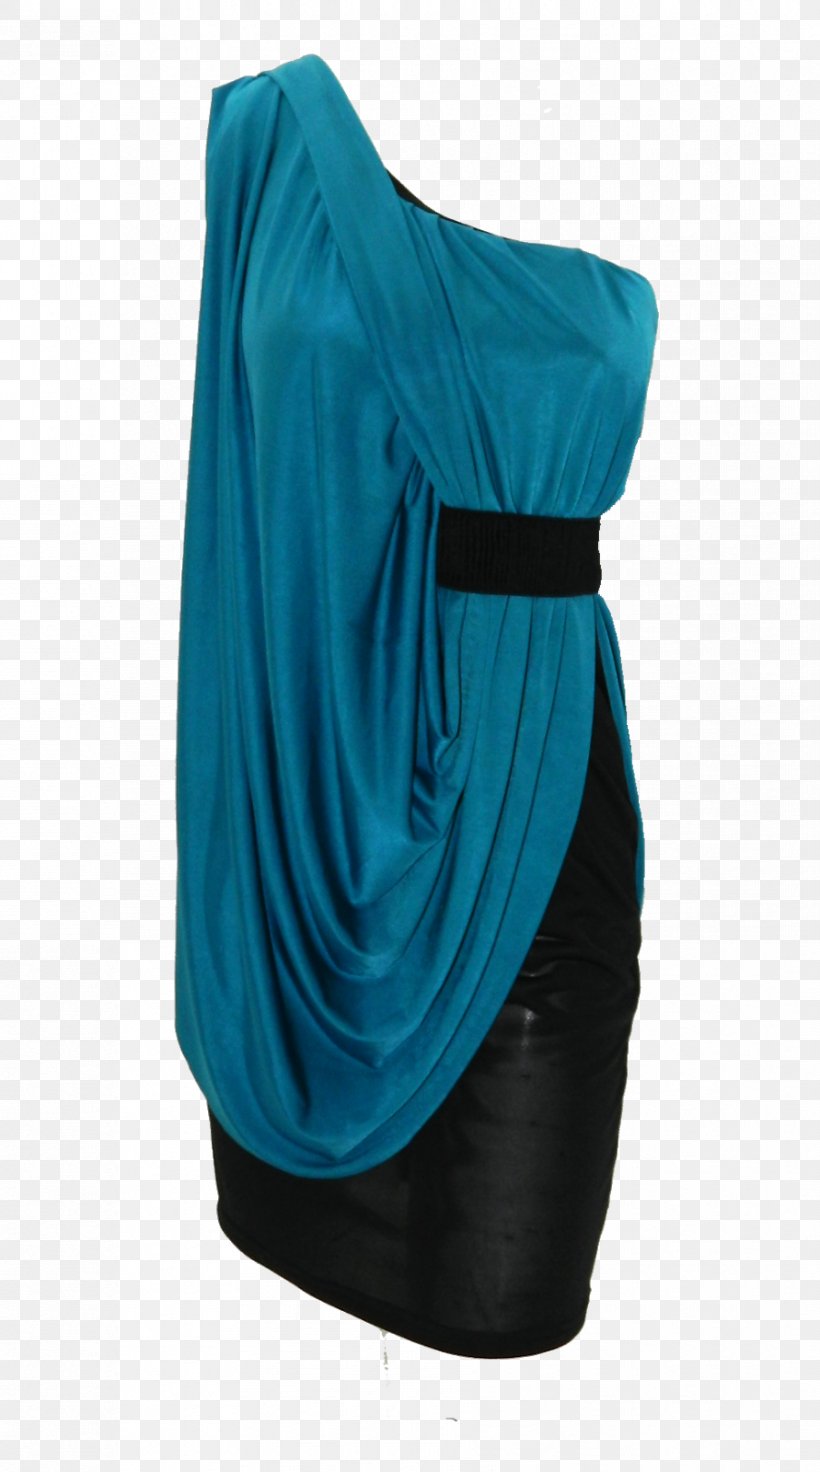 Shoulder Cocktail Dress Turquoise, PNG, 891x1600px, Shoulder, Aqua, Cocktail, Cocktail Dress, Day Dress Download Free